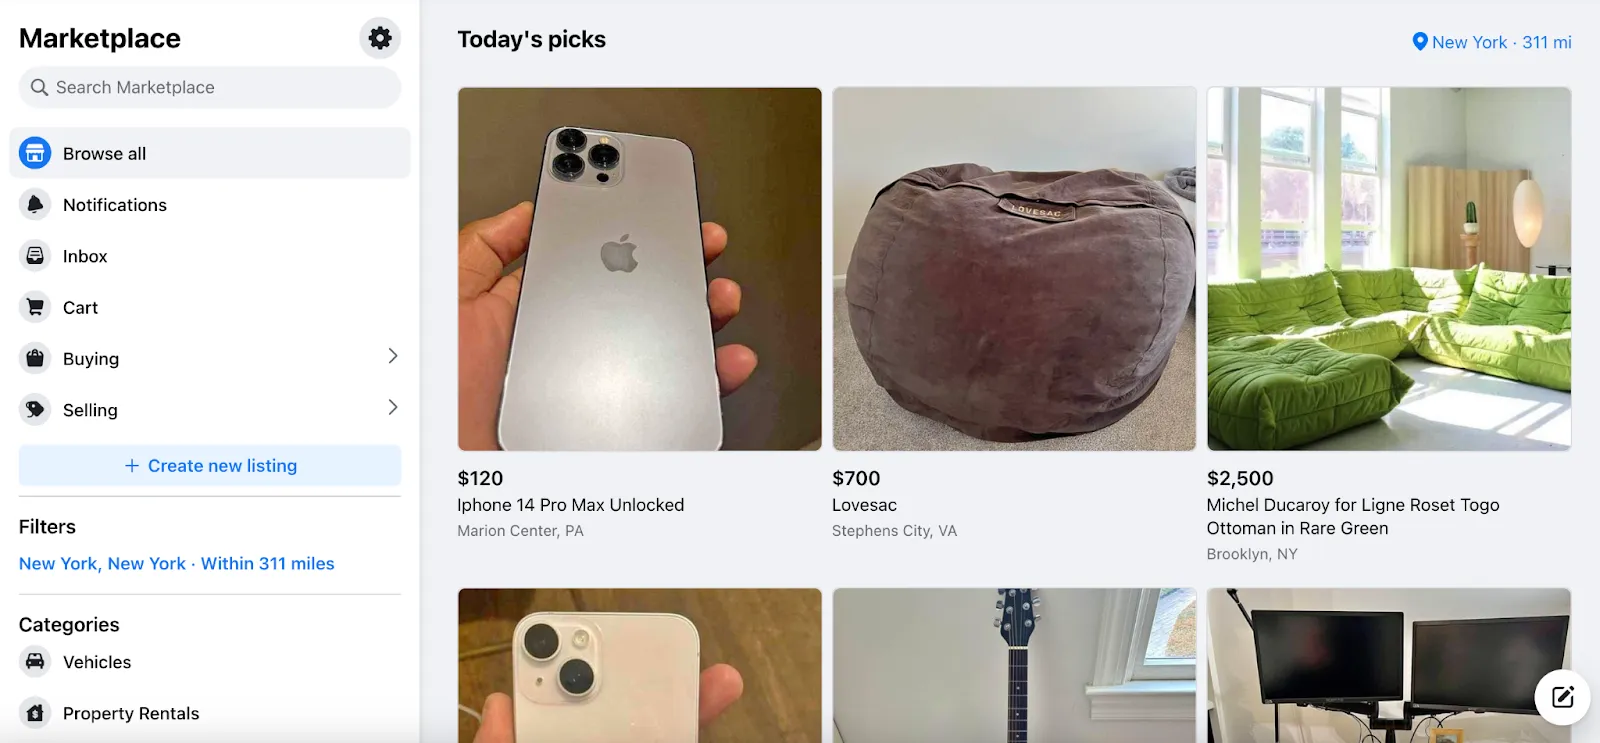 Marketplace-Facebook Buy and Sell Items Locally or Shipped